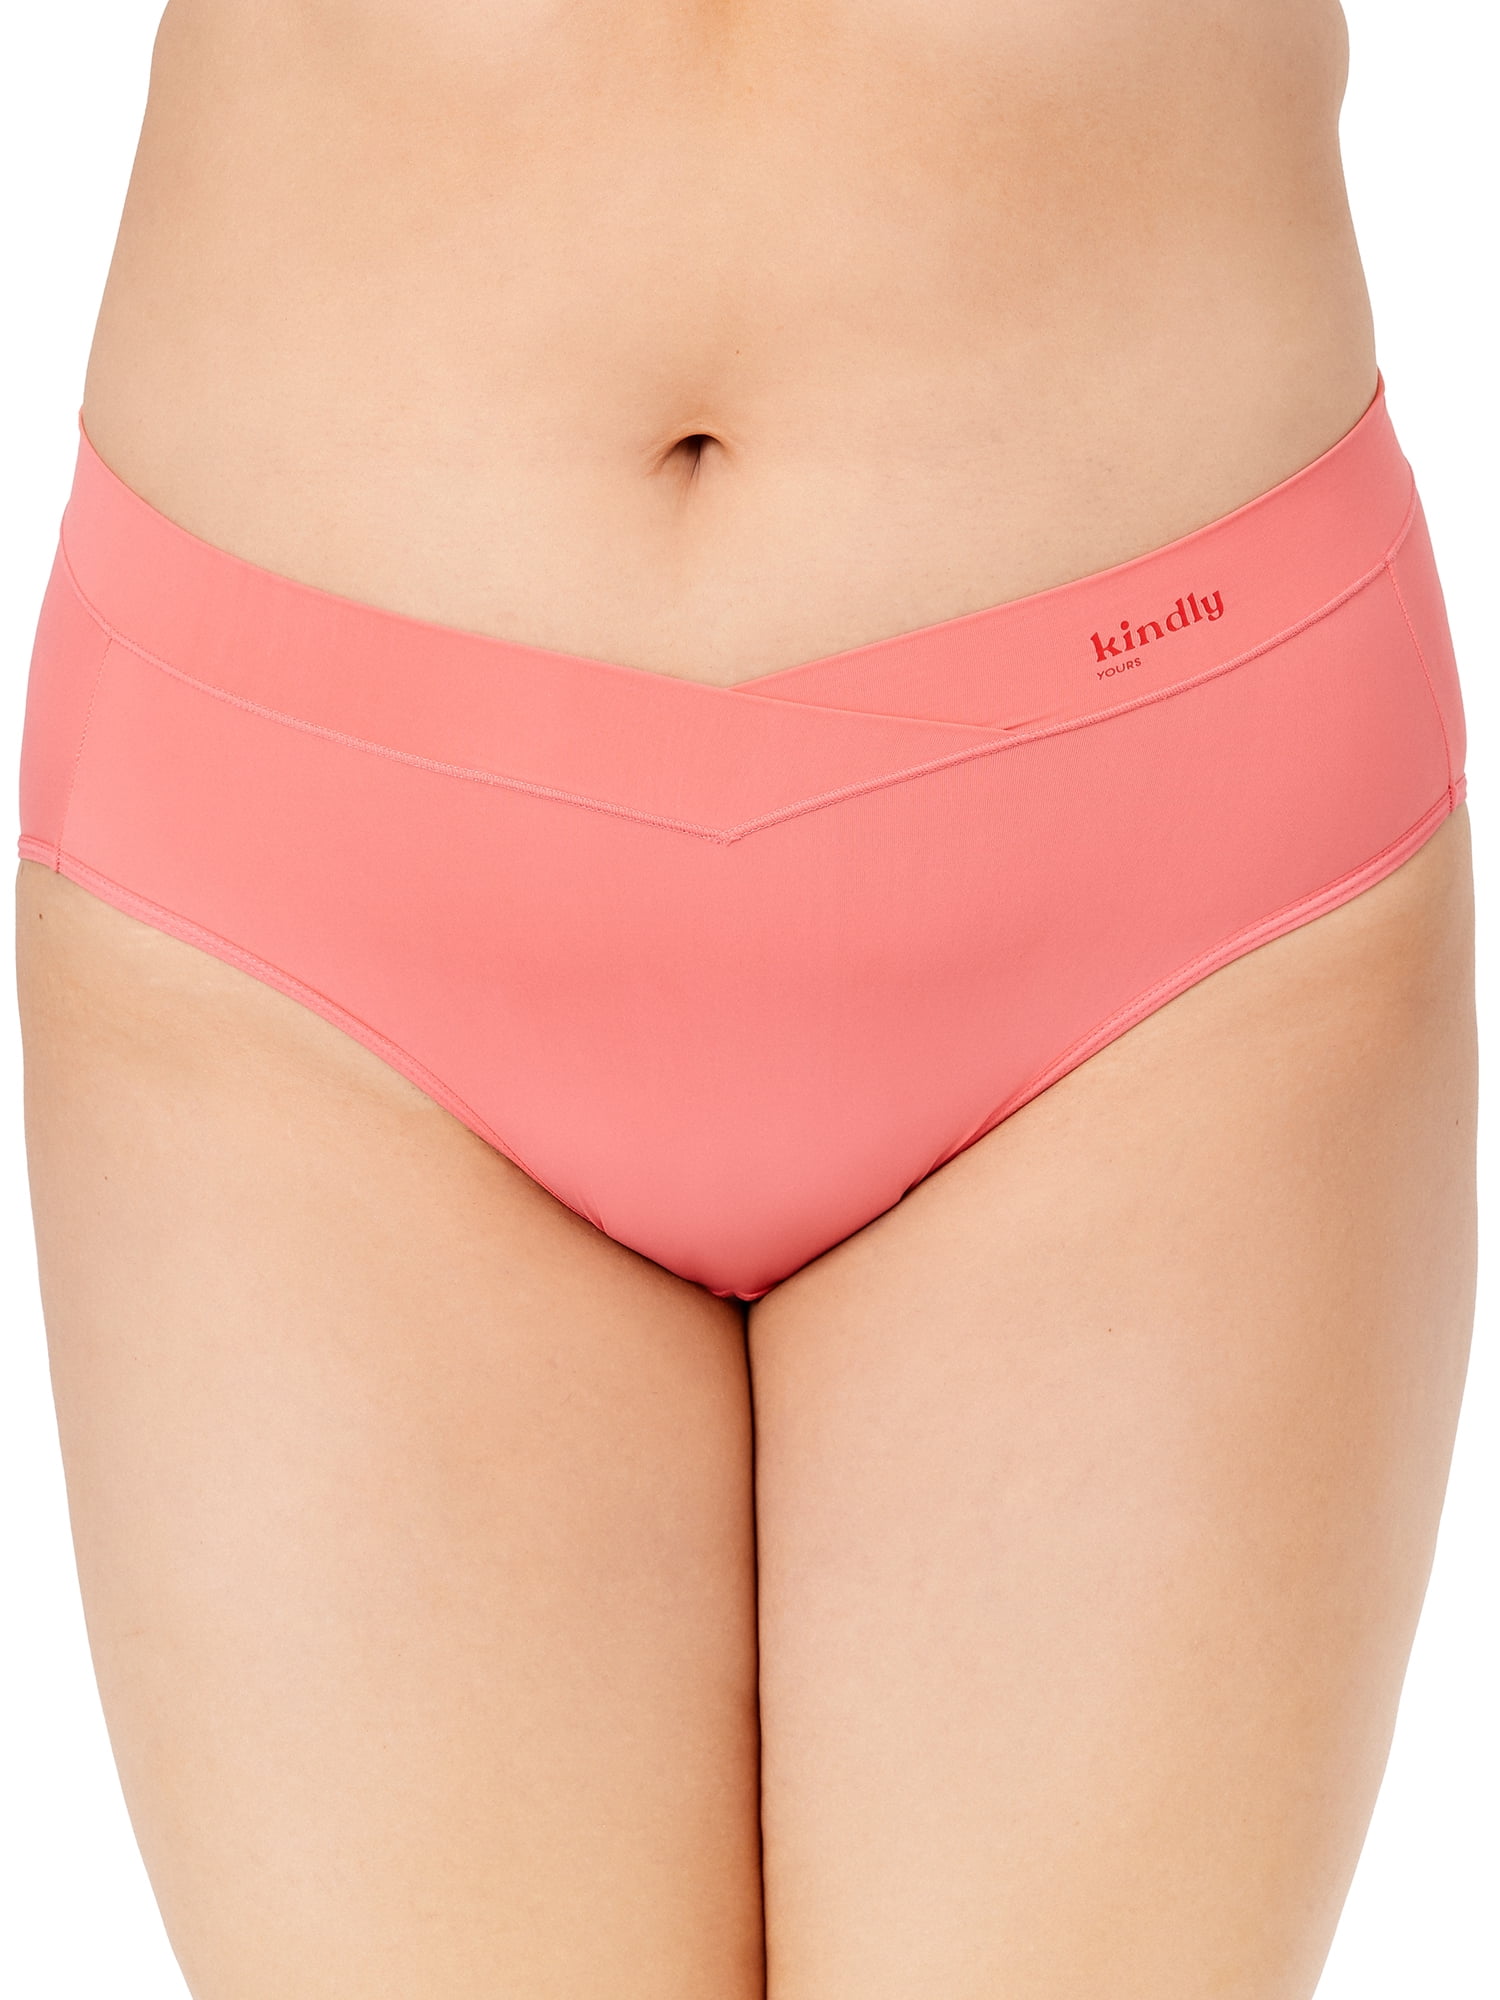 Hanes Seamless Pink High Cut Panties-Ladies-Girls-Women-Online--India  @ Cheap Rates Apparel-Free Shipping-Cash on Delivery